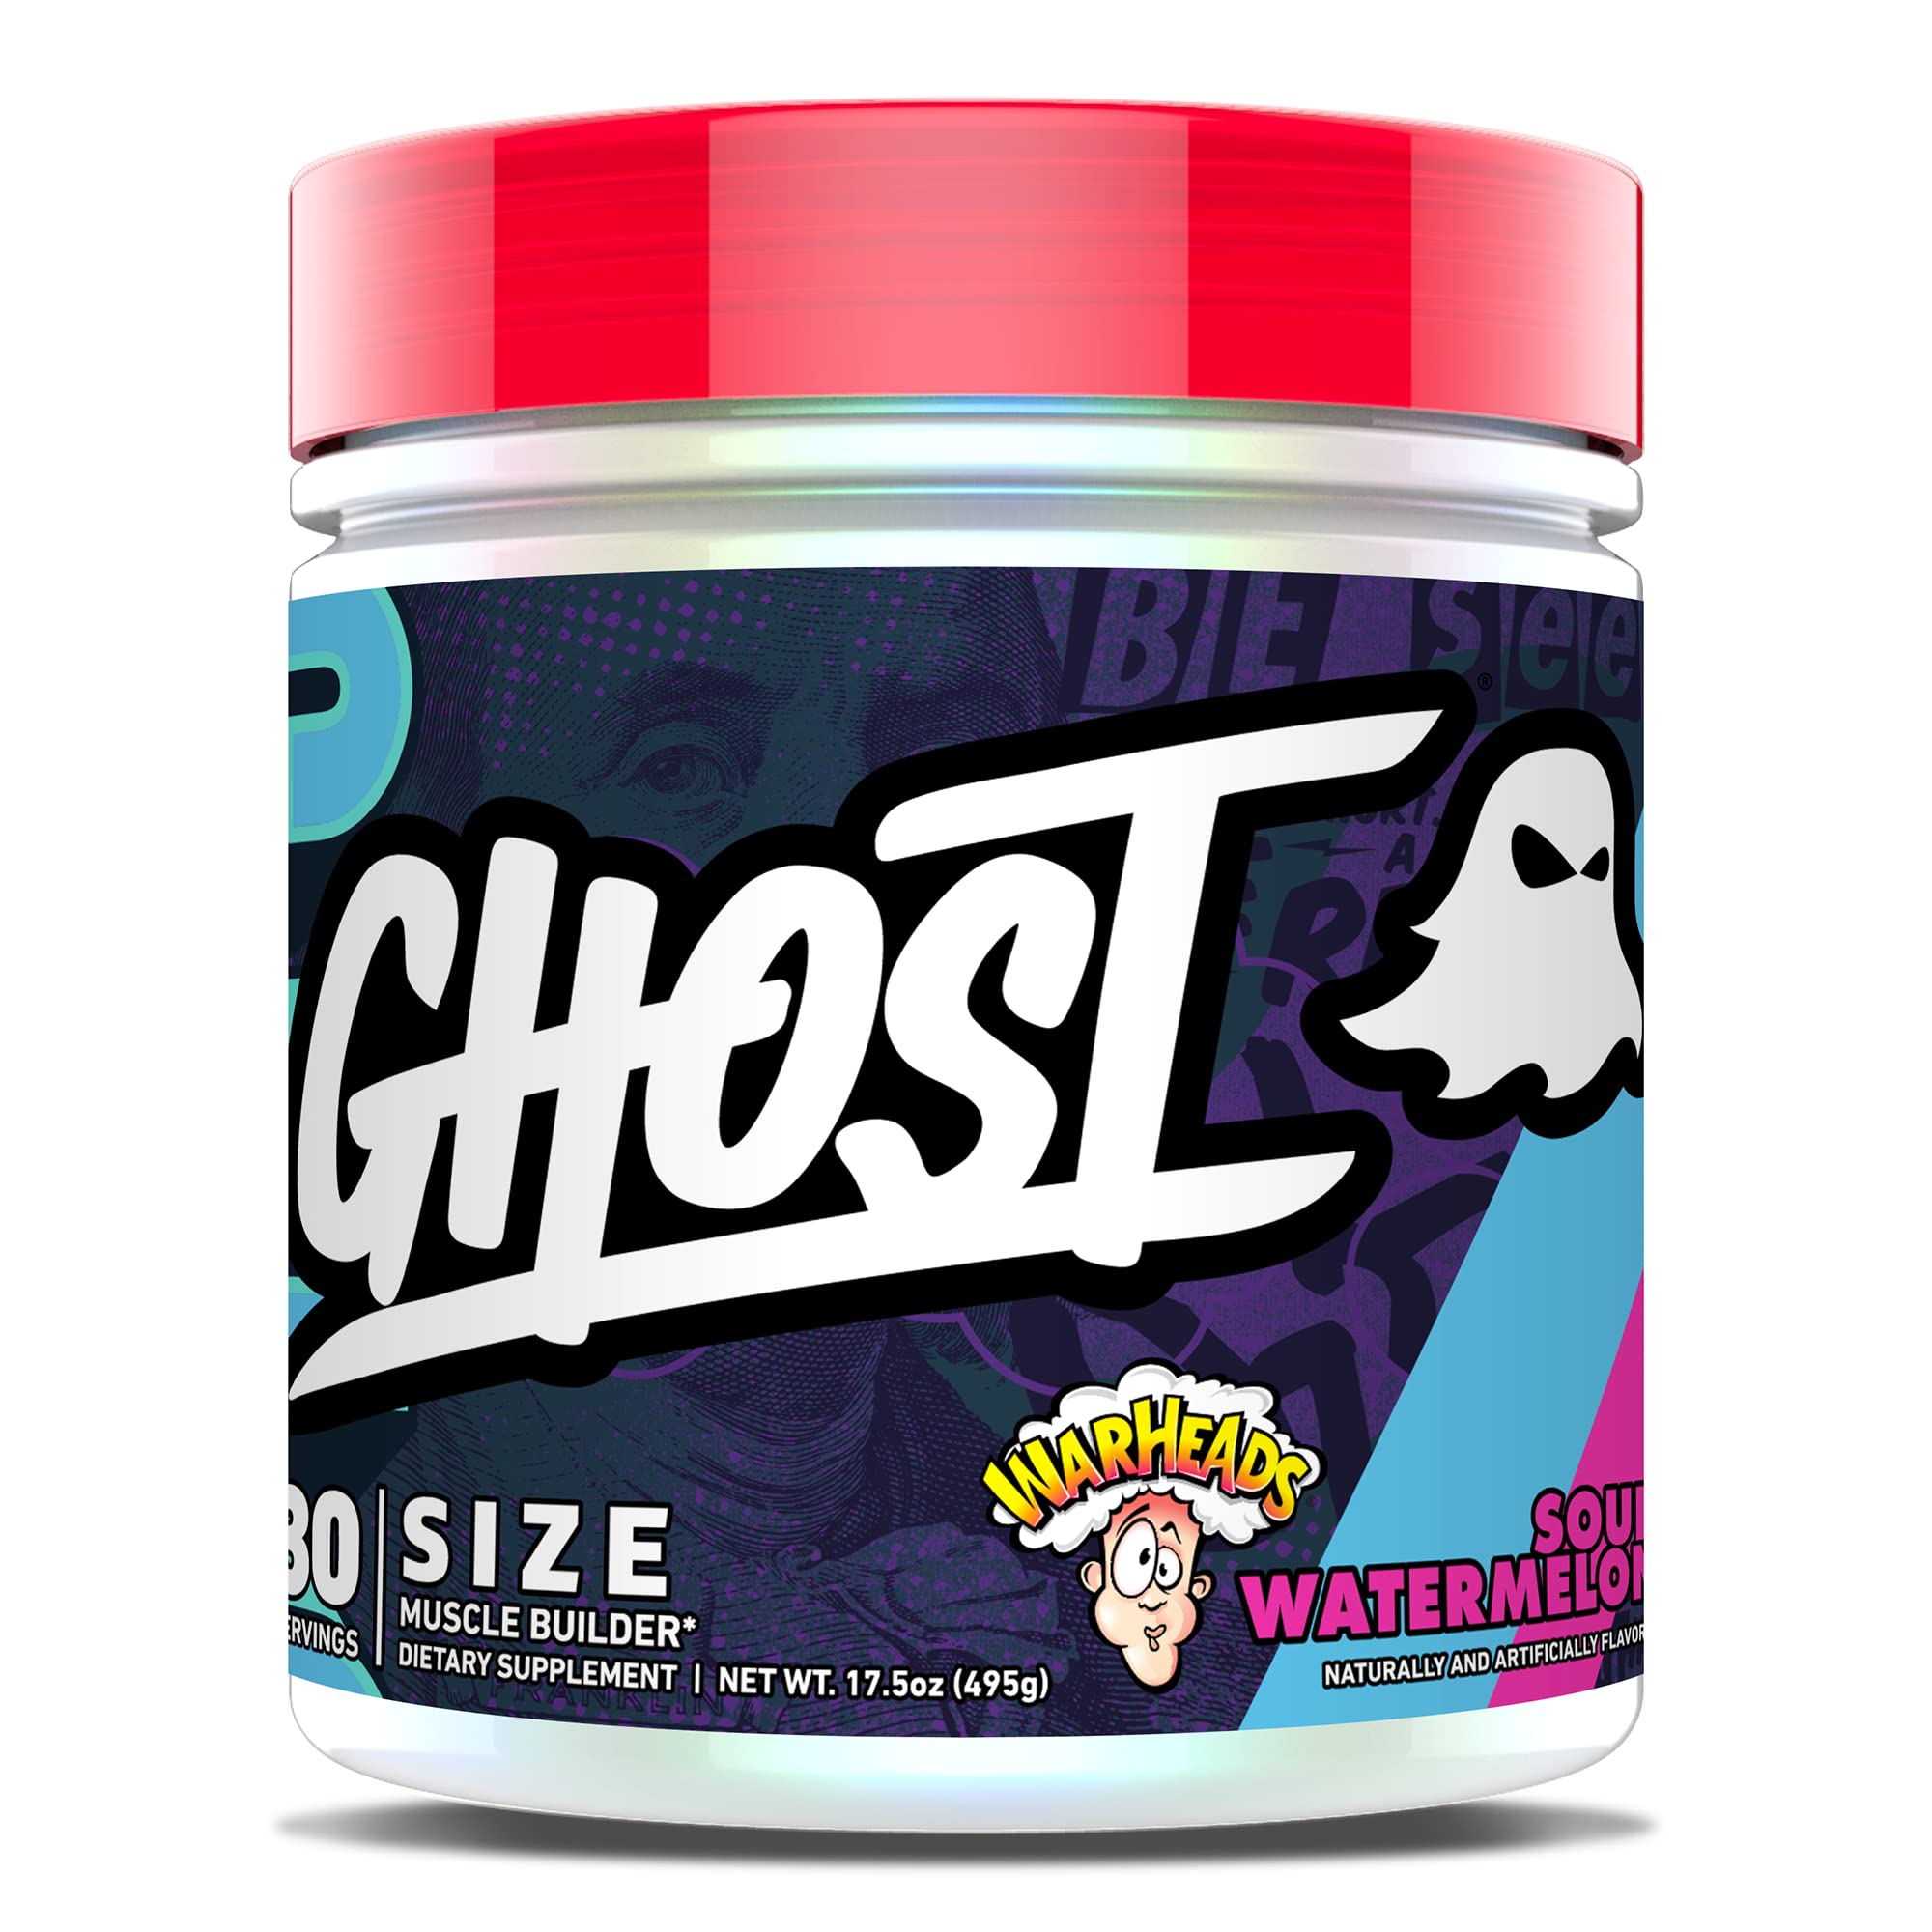 GHOST Size Muscle Builder